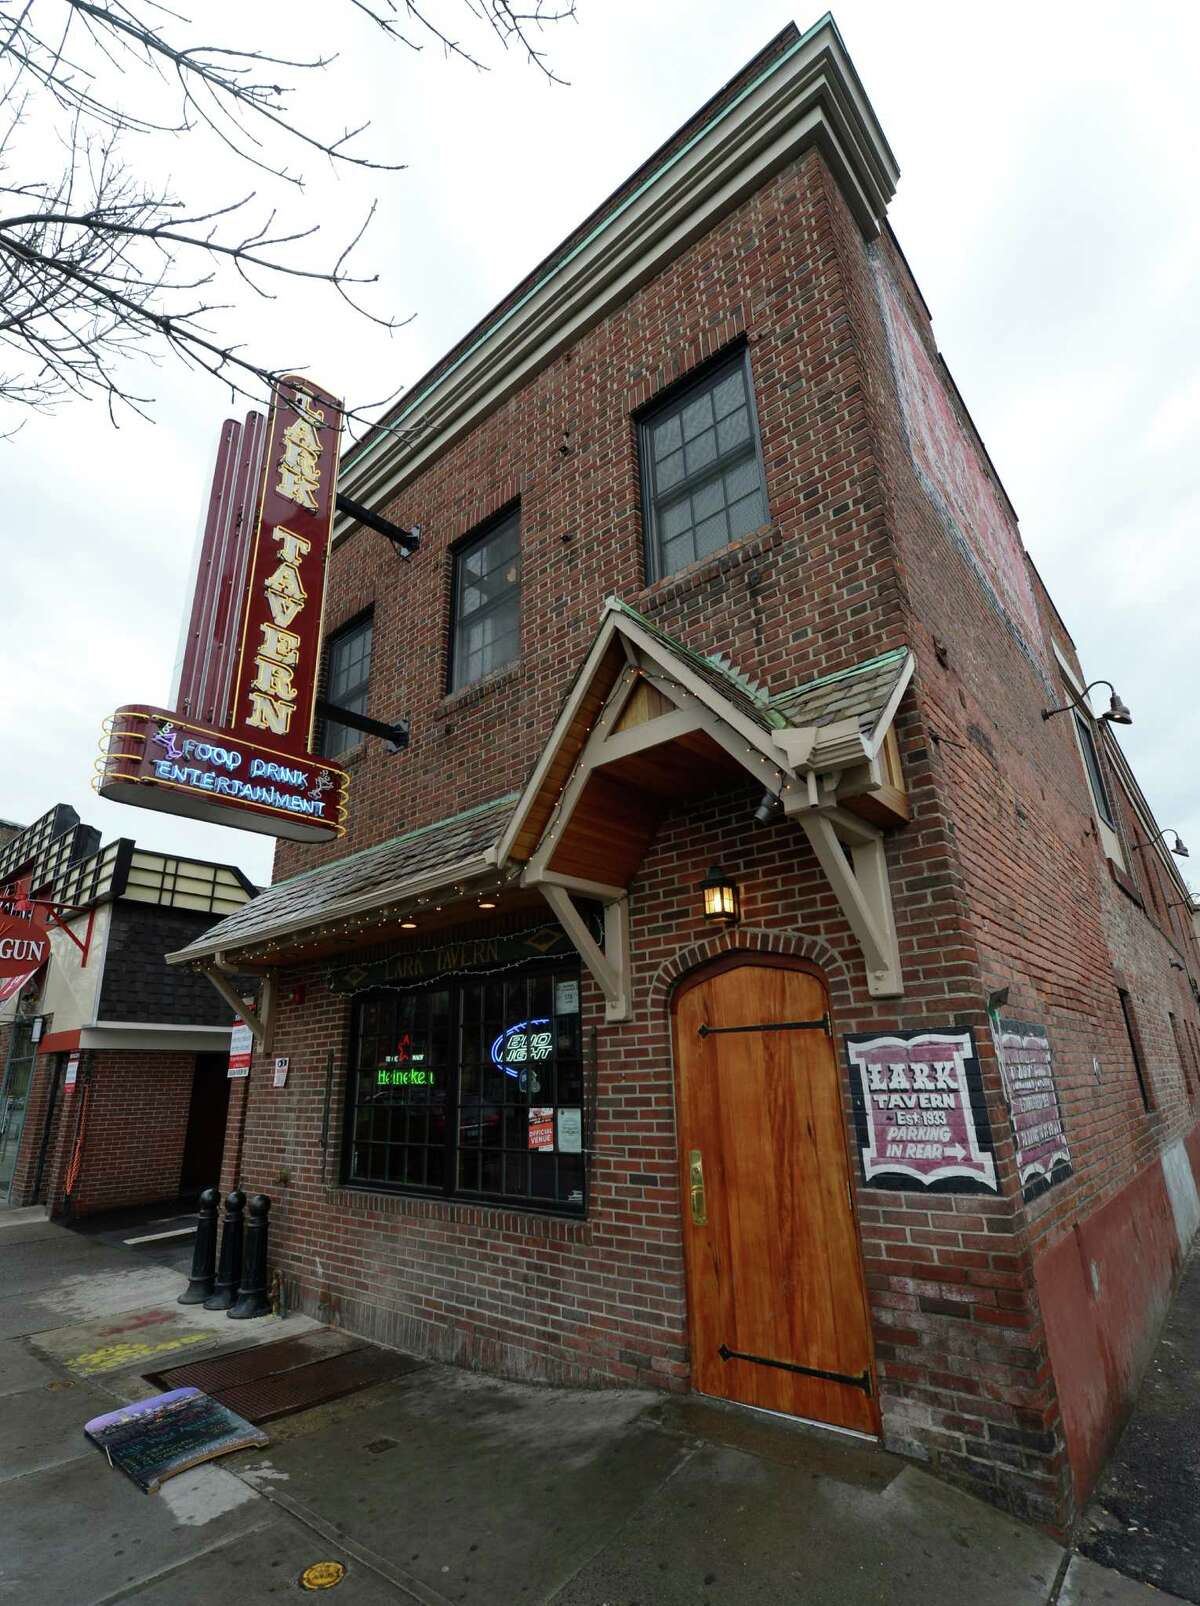 The Lark Tavern, a watering hole near the corner of Lark Street and Madison Avenue in Albany starting in 1933, has been closed since the pandemic began in March, and the building is for sale.